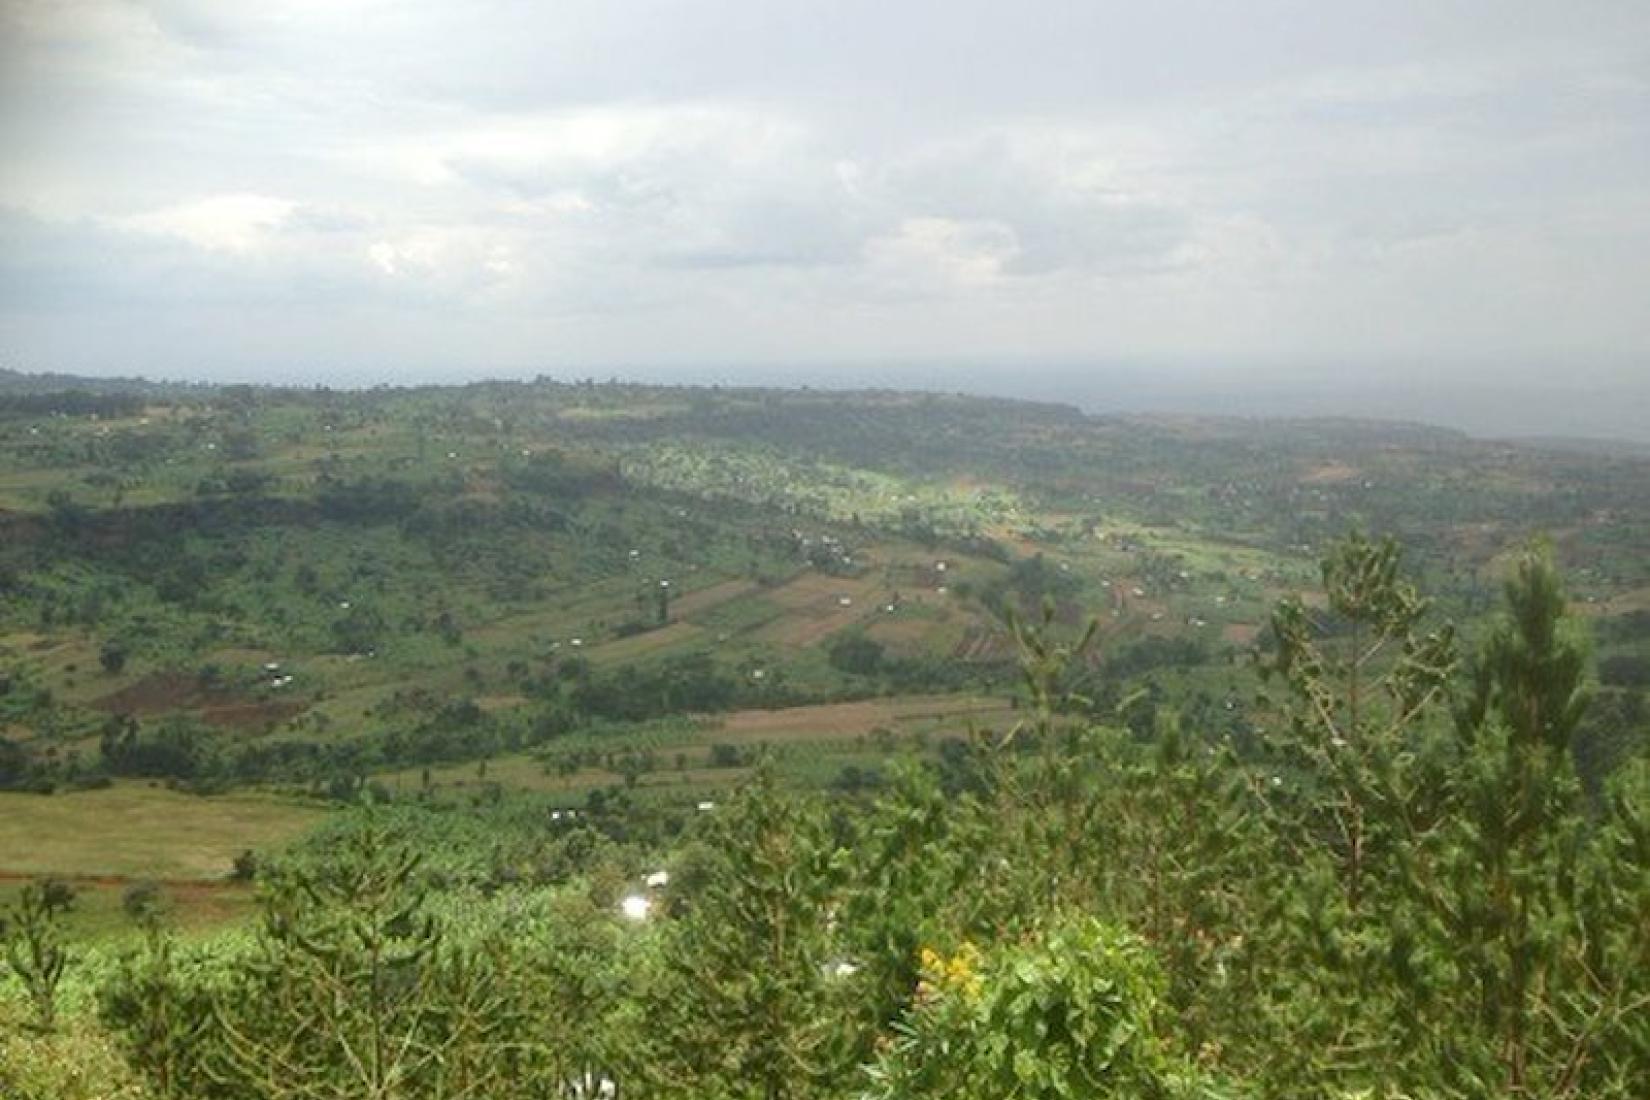 Views of the intensively farms slopes of Mt Elgon below Kapchorwa - a tropical highland region of intensive agriculture. Image: Jason Alexandra